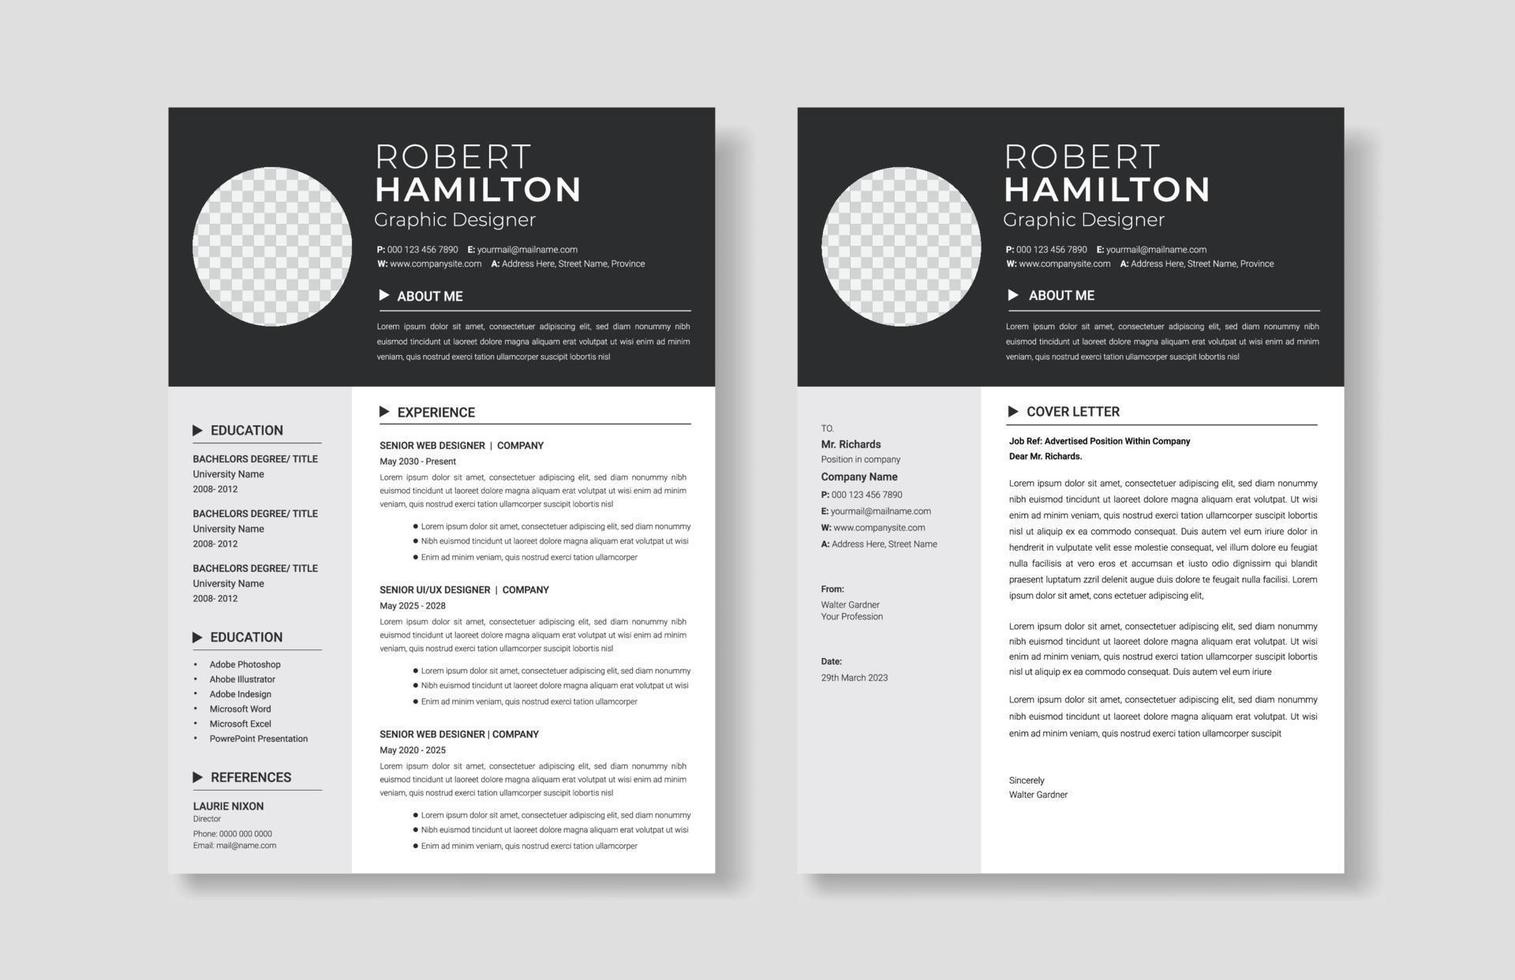 Minimal and clean resume or cv template vector